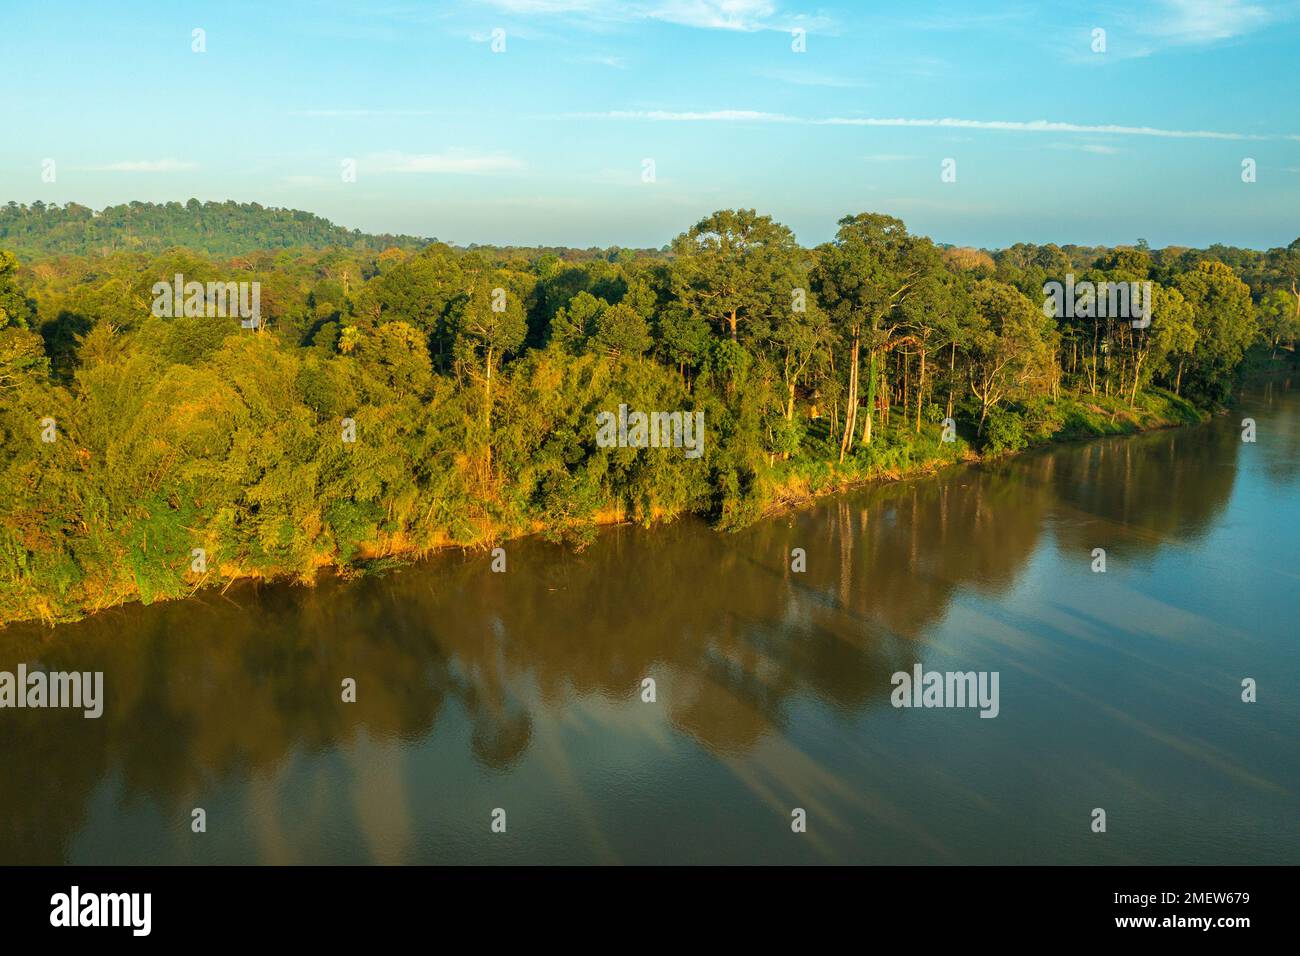 Aerial view of  The Song Dong Nai River in Cat Tien National Park, Vietnam Stock Photo